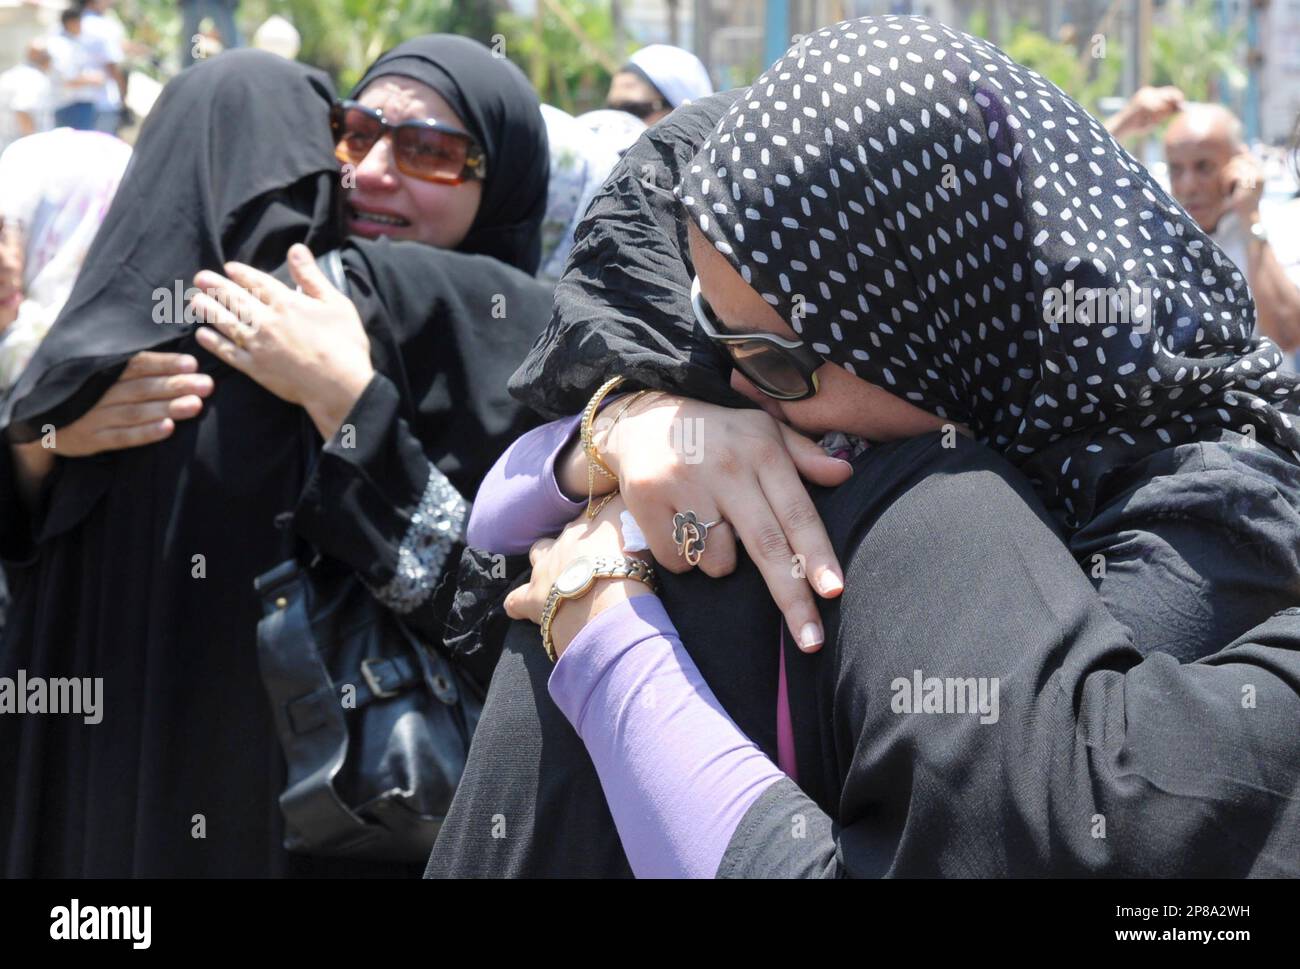 Egyptians React During The Funeral For 32 Year Old Pregnant Egyptian Woman Marwa El Sherbini